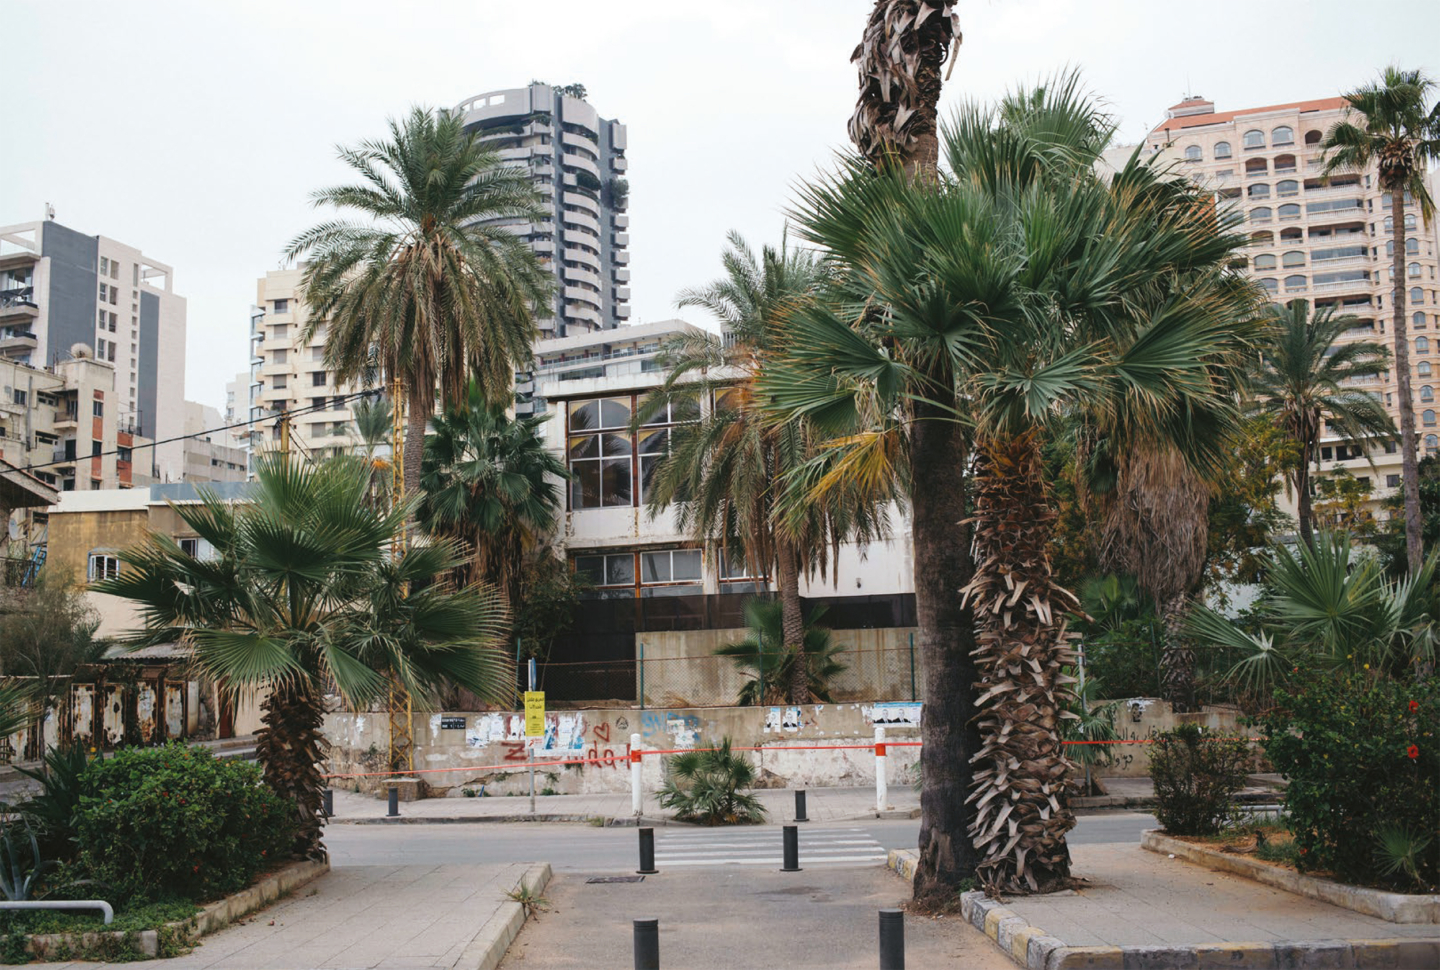 Beirut for Monocle